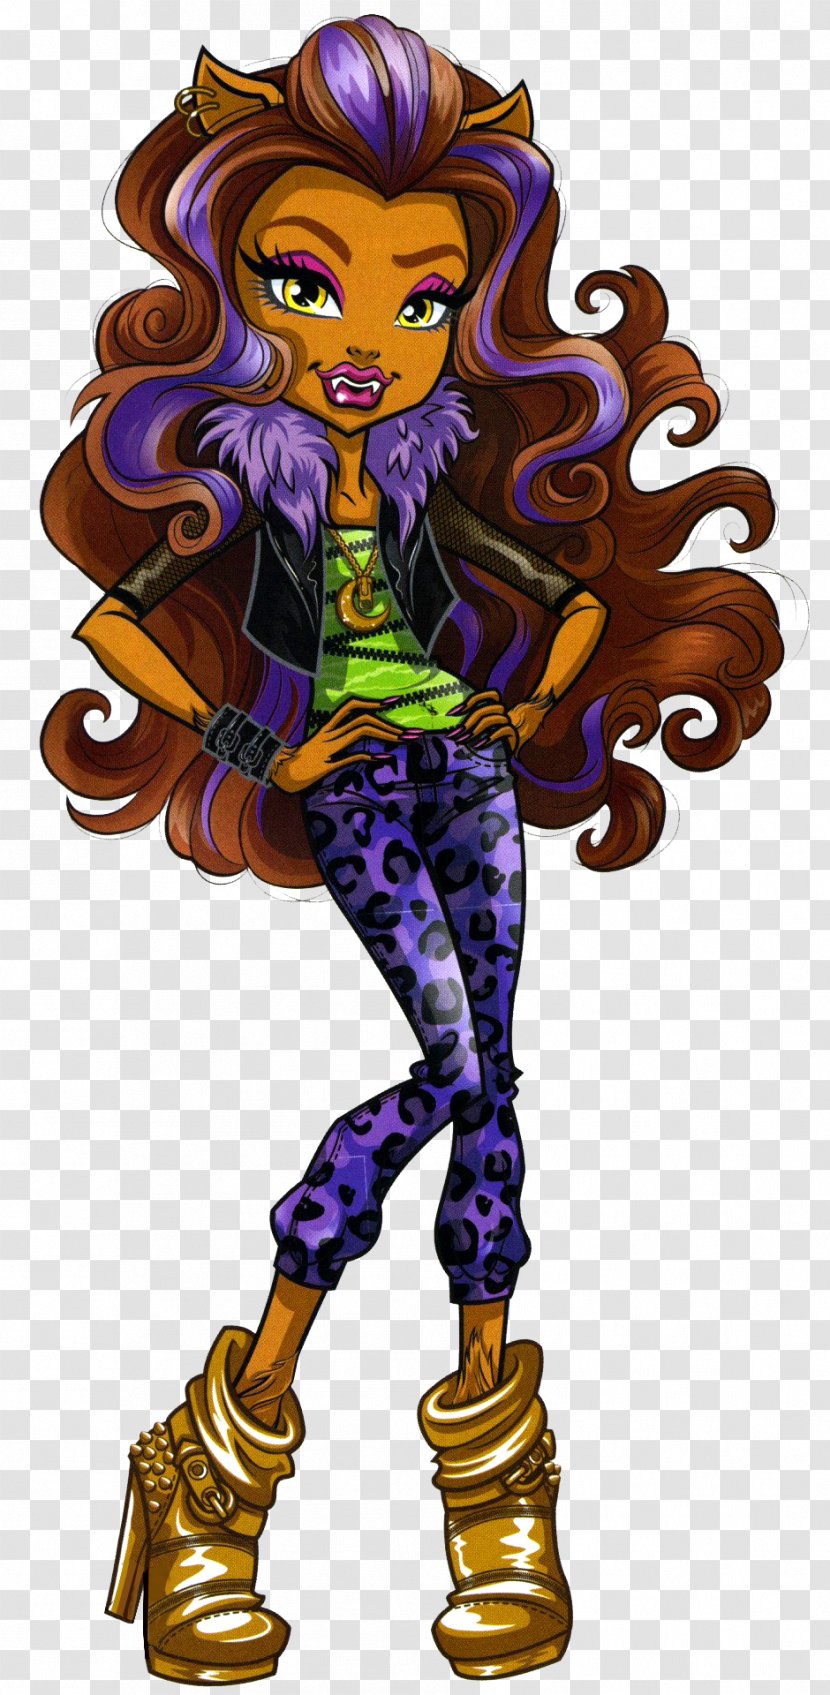 Gray Wolf Clawdeen Frankie Stein Cleo DeNile Monster High - Original Ghouls Collection - Doll Transparent PNG